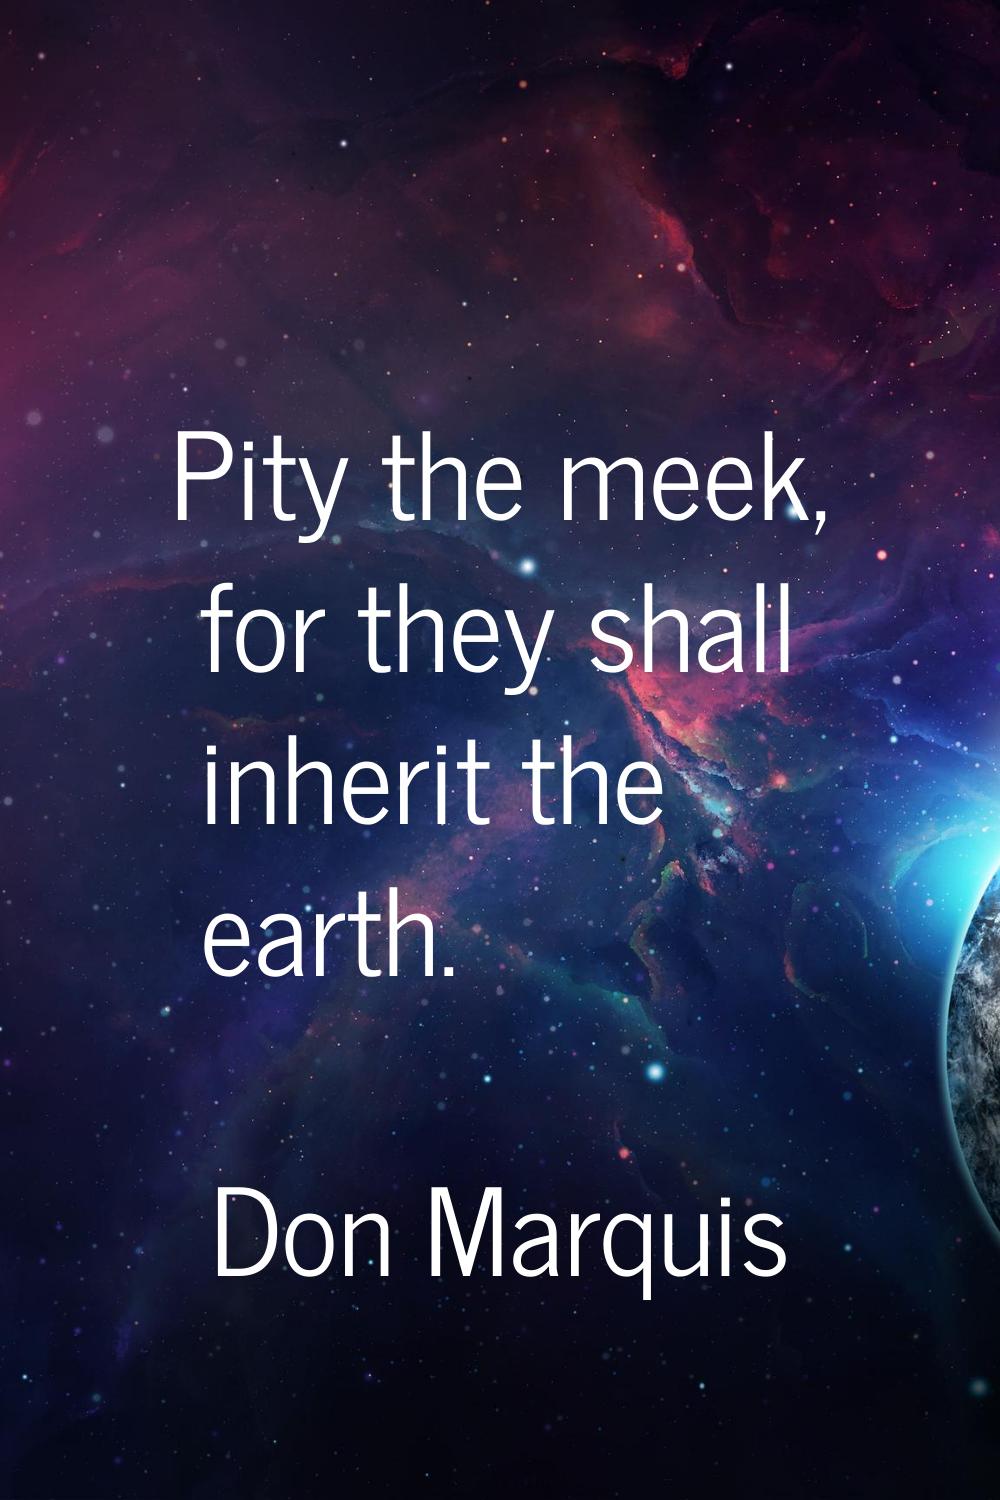 Pity the meek, for they shall inherit the earth.